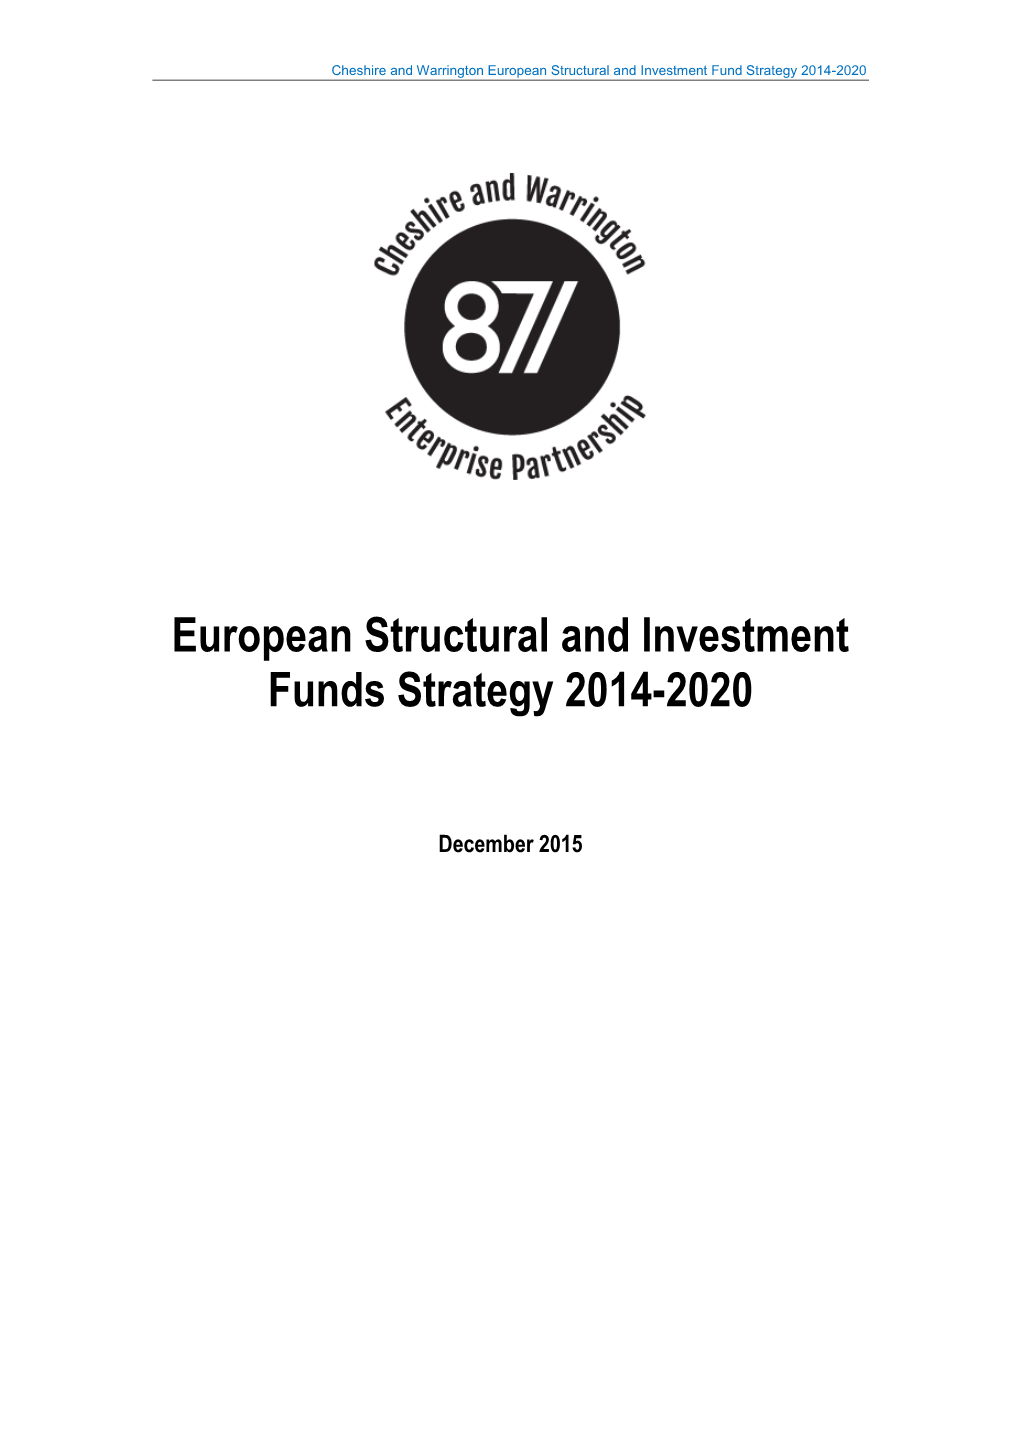 European Structural and Investment Funds Strategy 2014-2020